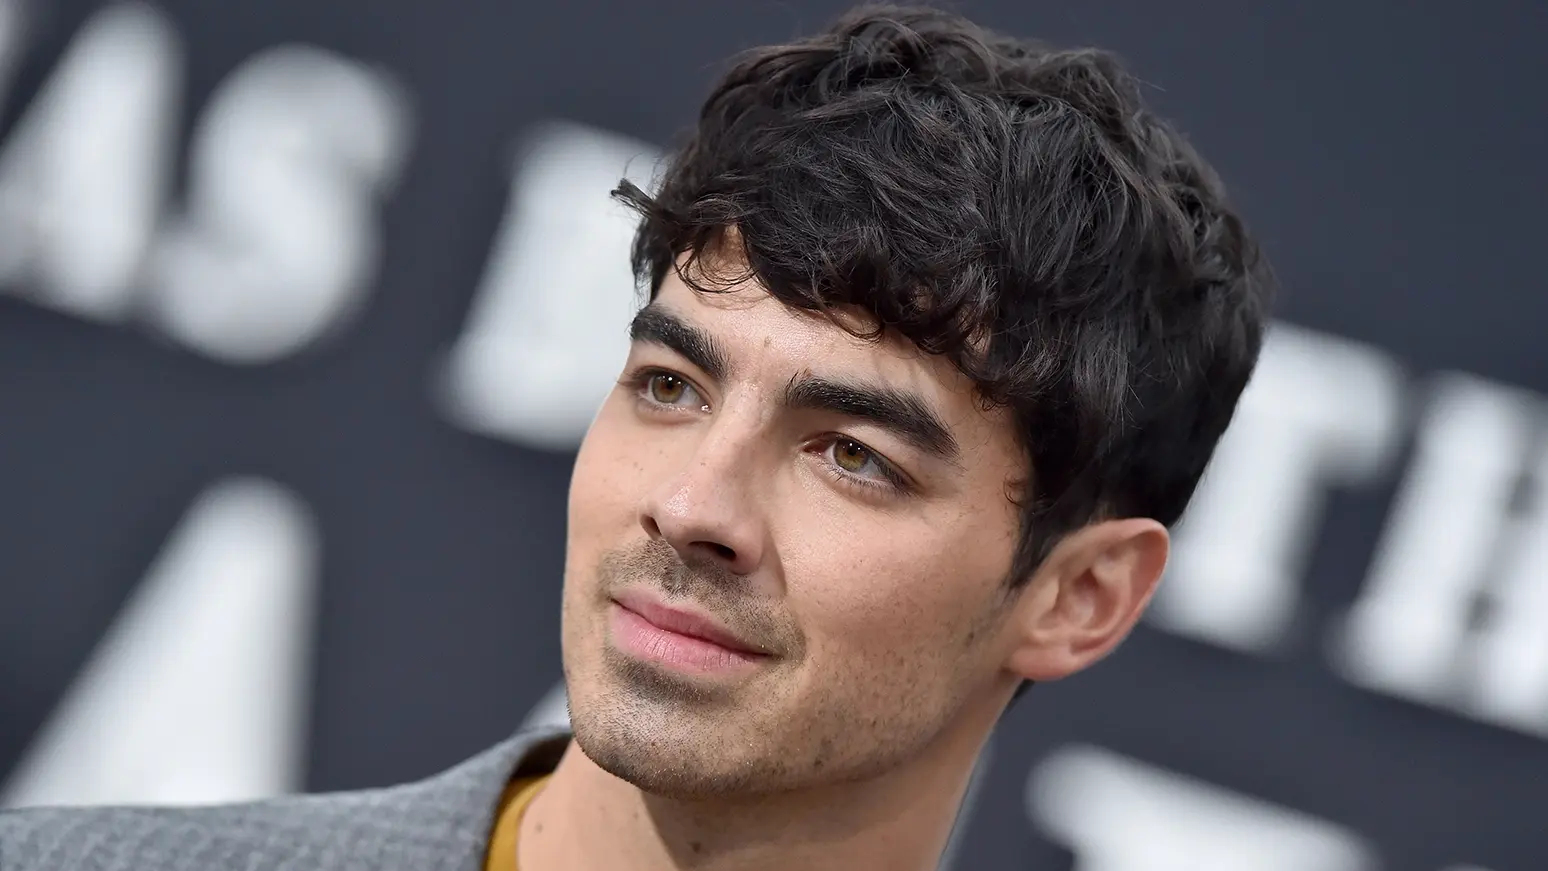 Joe Jonas had his hopes up while auditioning for Spiderman in 2012